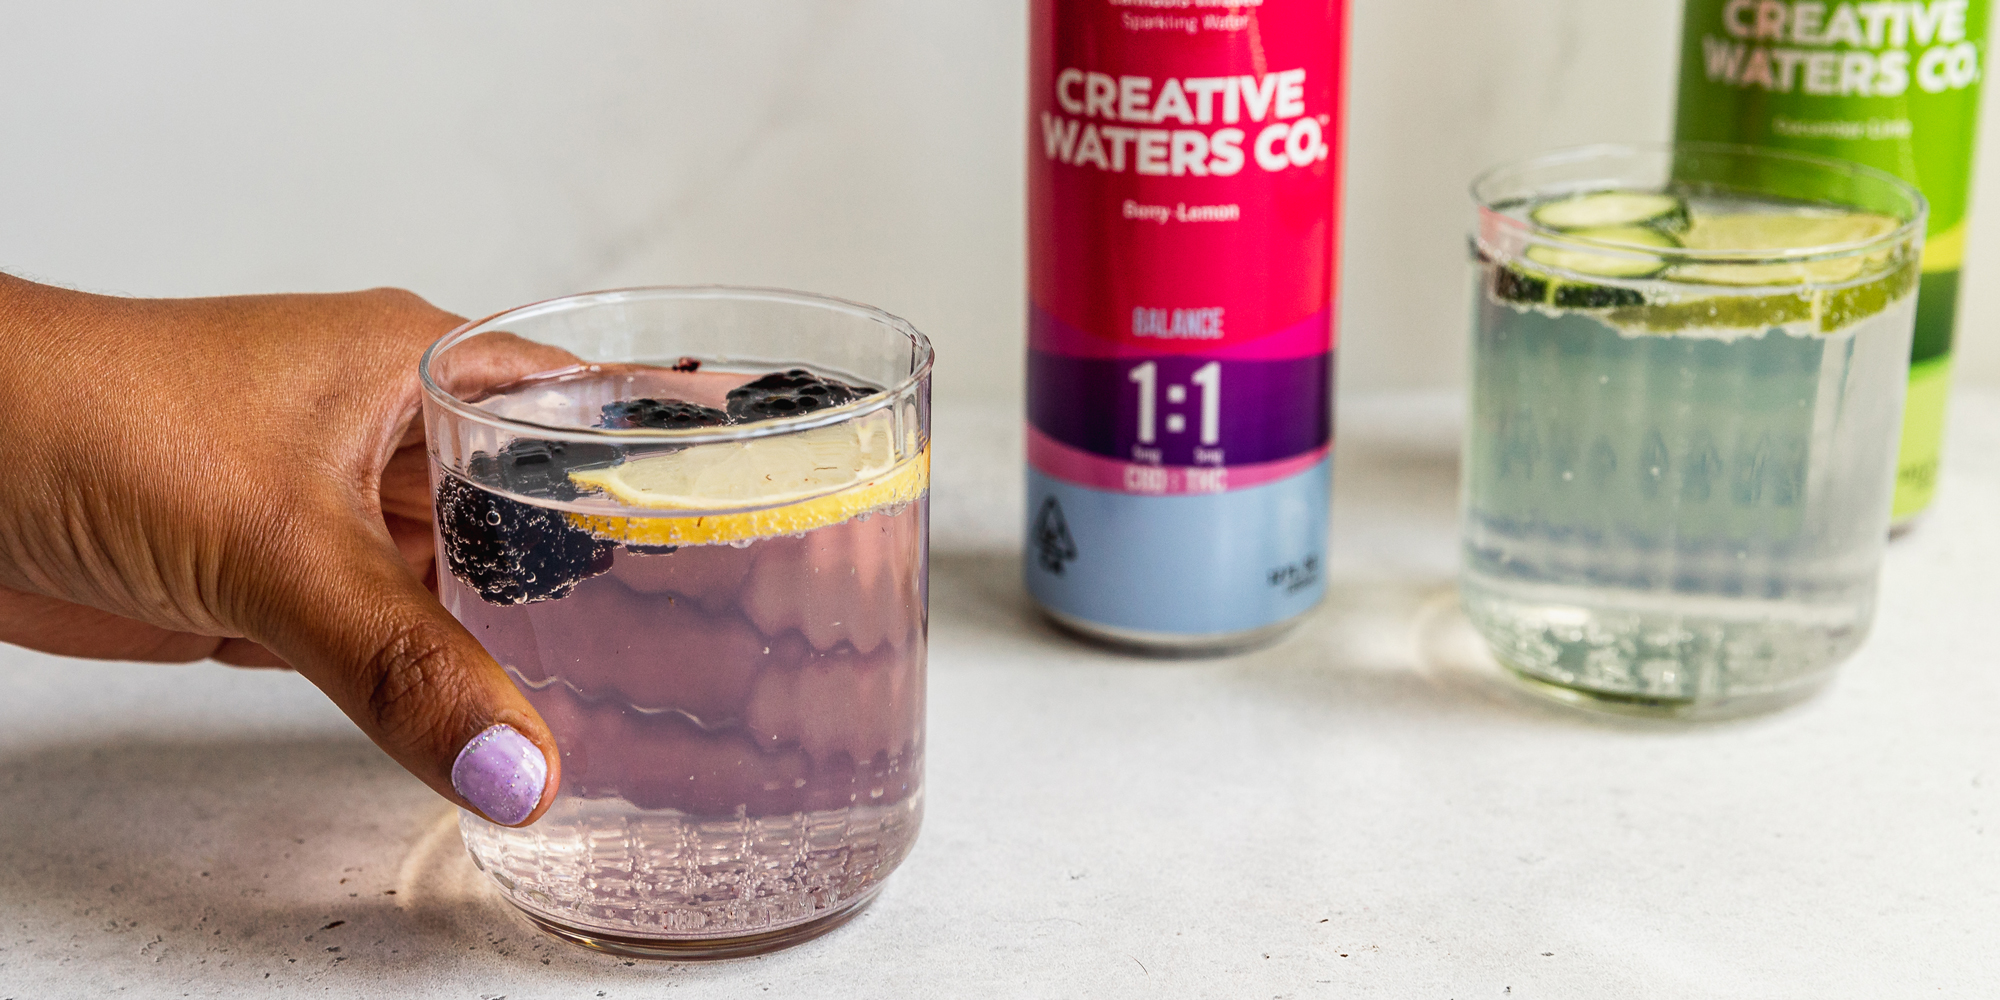 Creative Waters Co cannabis beverages